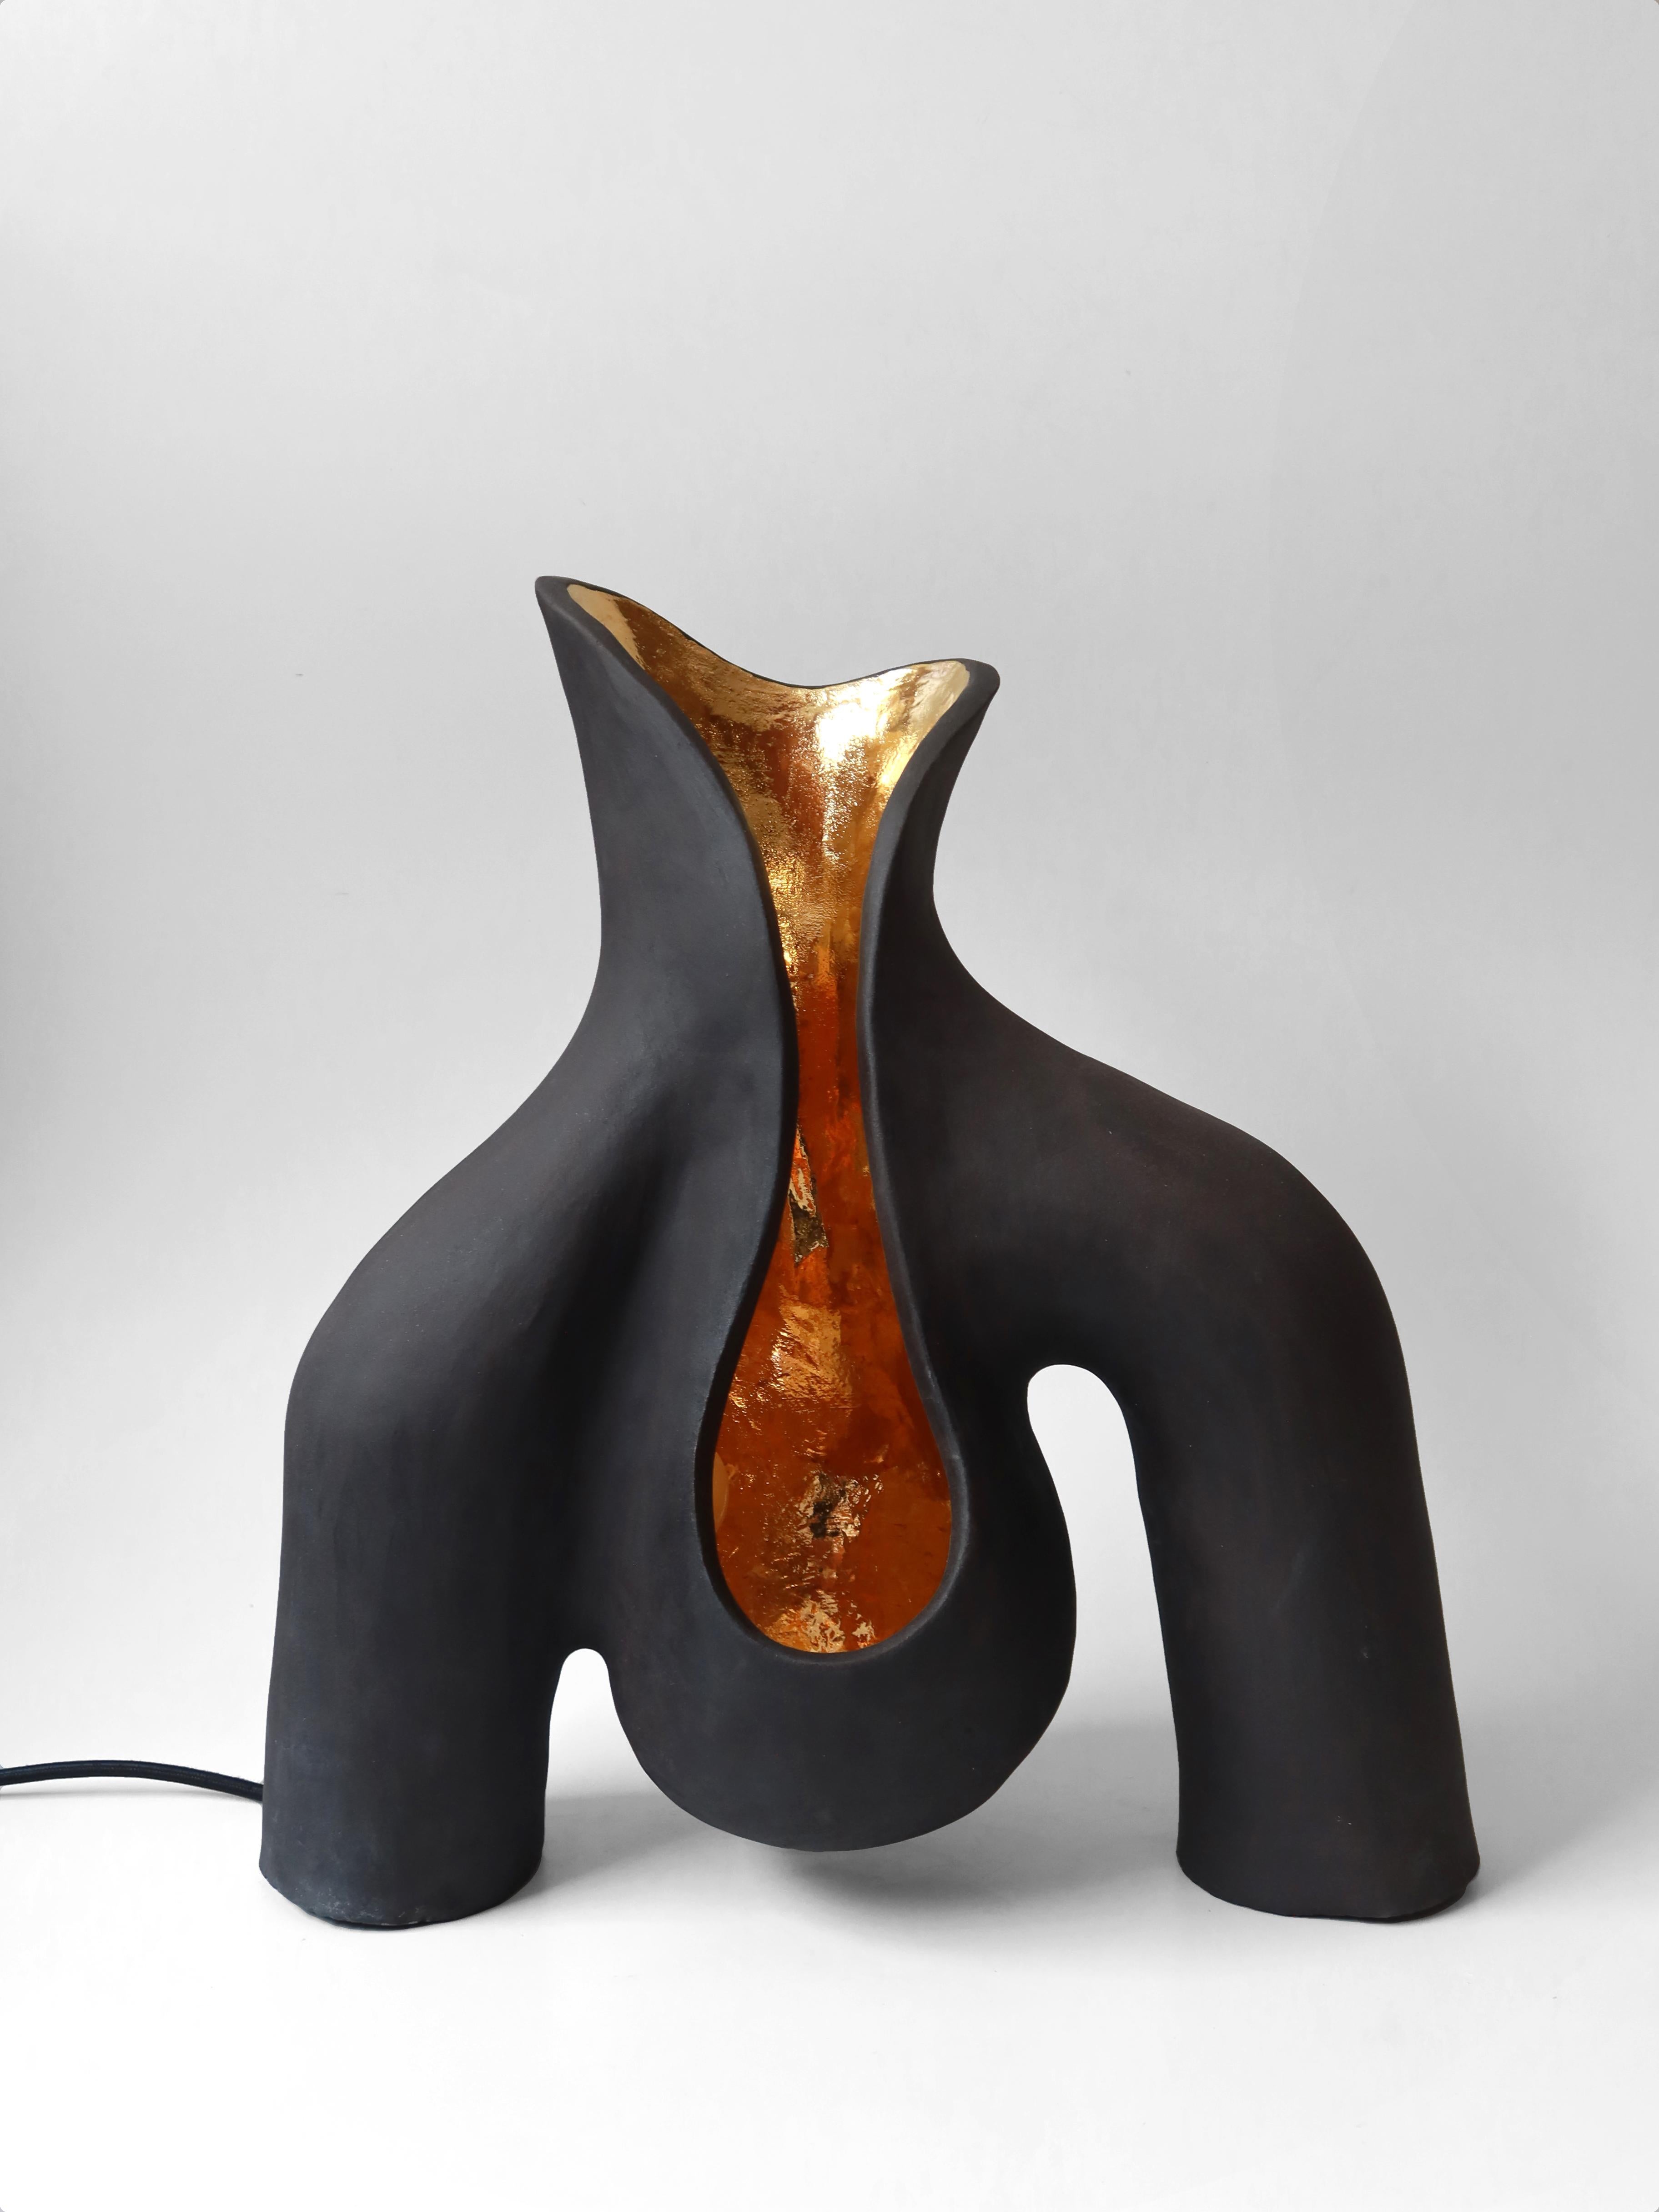 Unique black and gold womb lamp by Jan Ernst
Dimensions: D 20 x W 40 x H 45 cm
Materials: White stoneware


Jan Ernst’s work takes on an experimental approach, as he prefers making bespoke pieces by hand. His organic design stems from